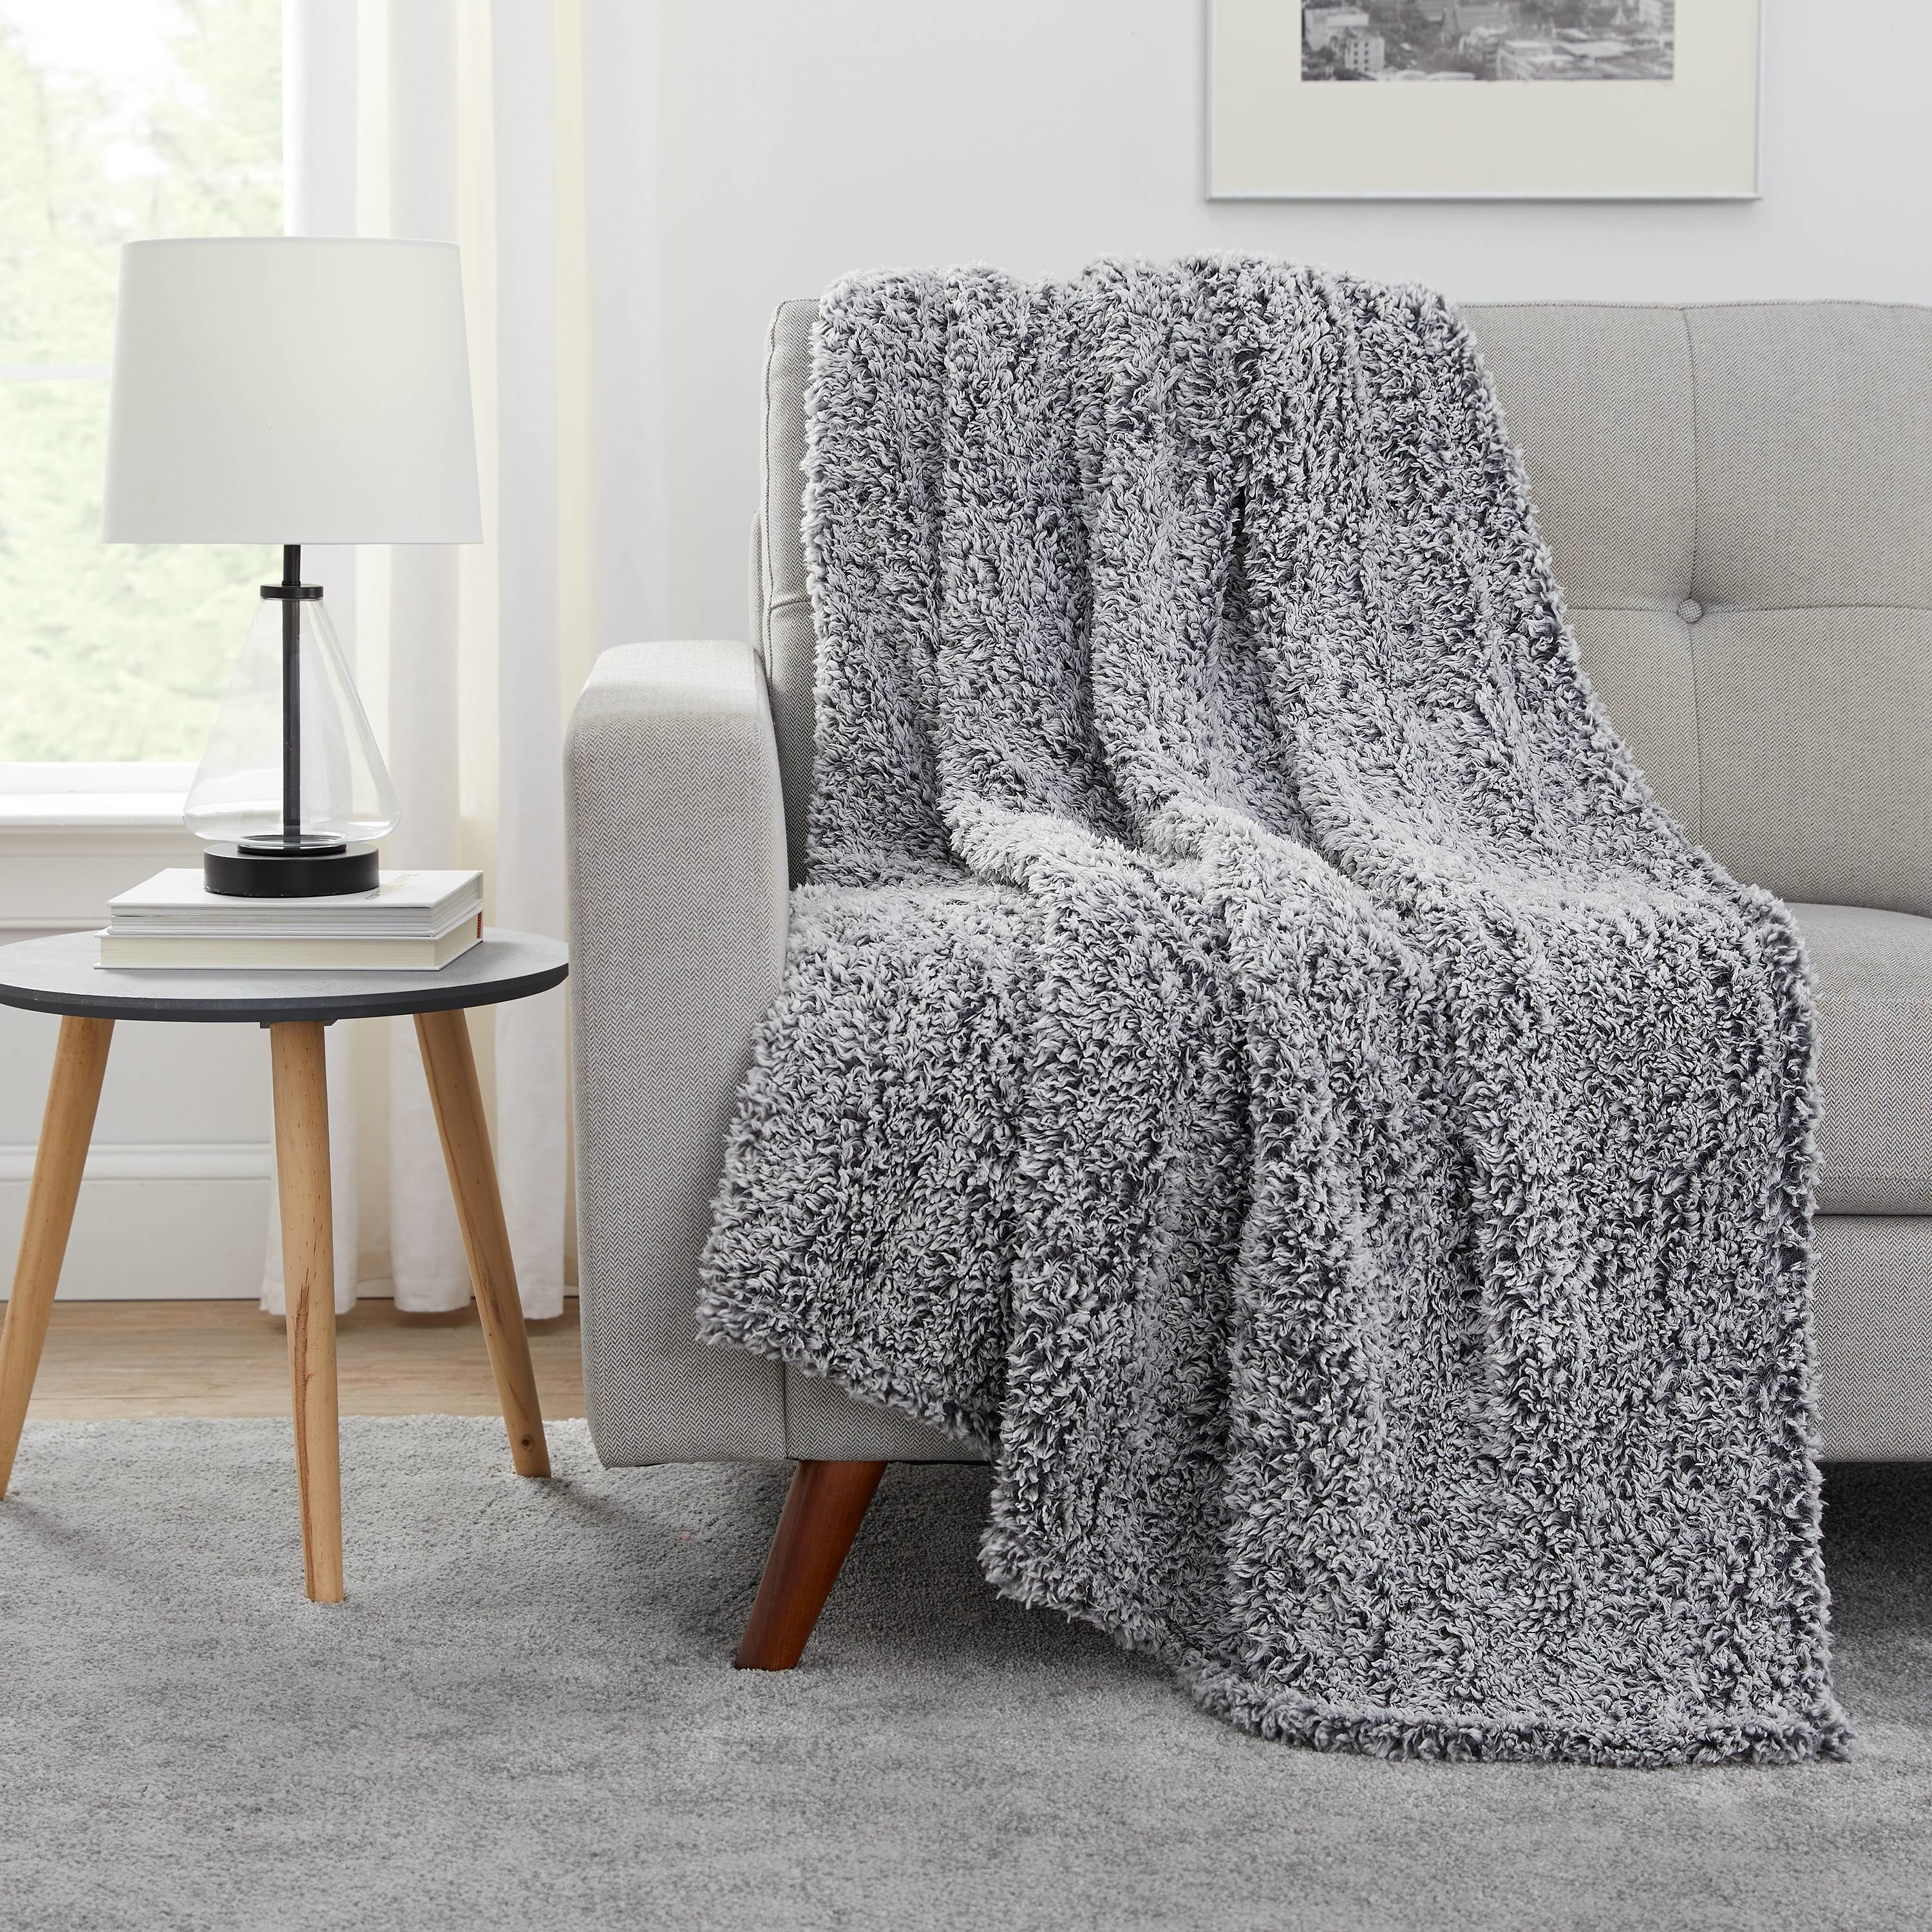 The blanket on a couch in the color gray